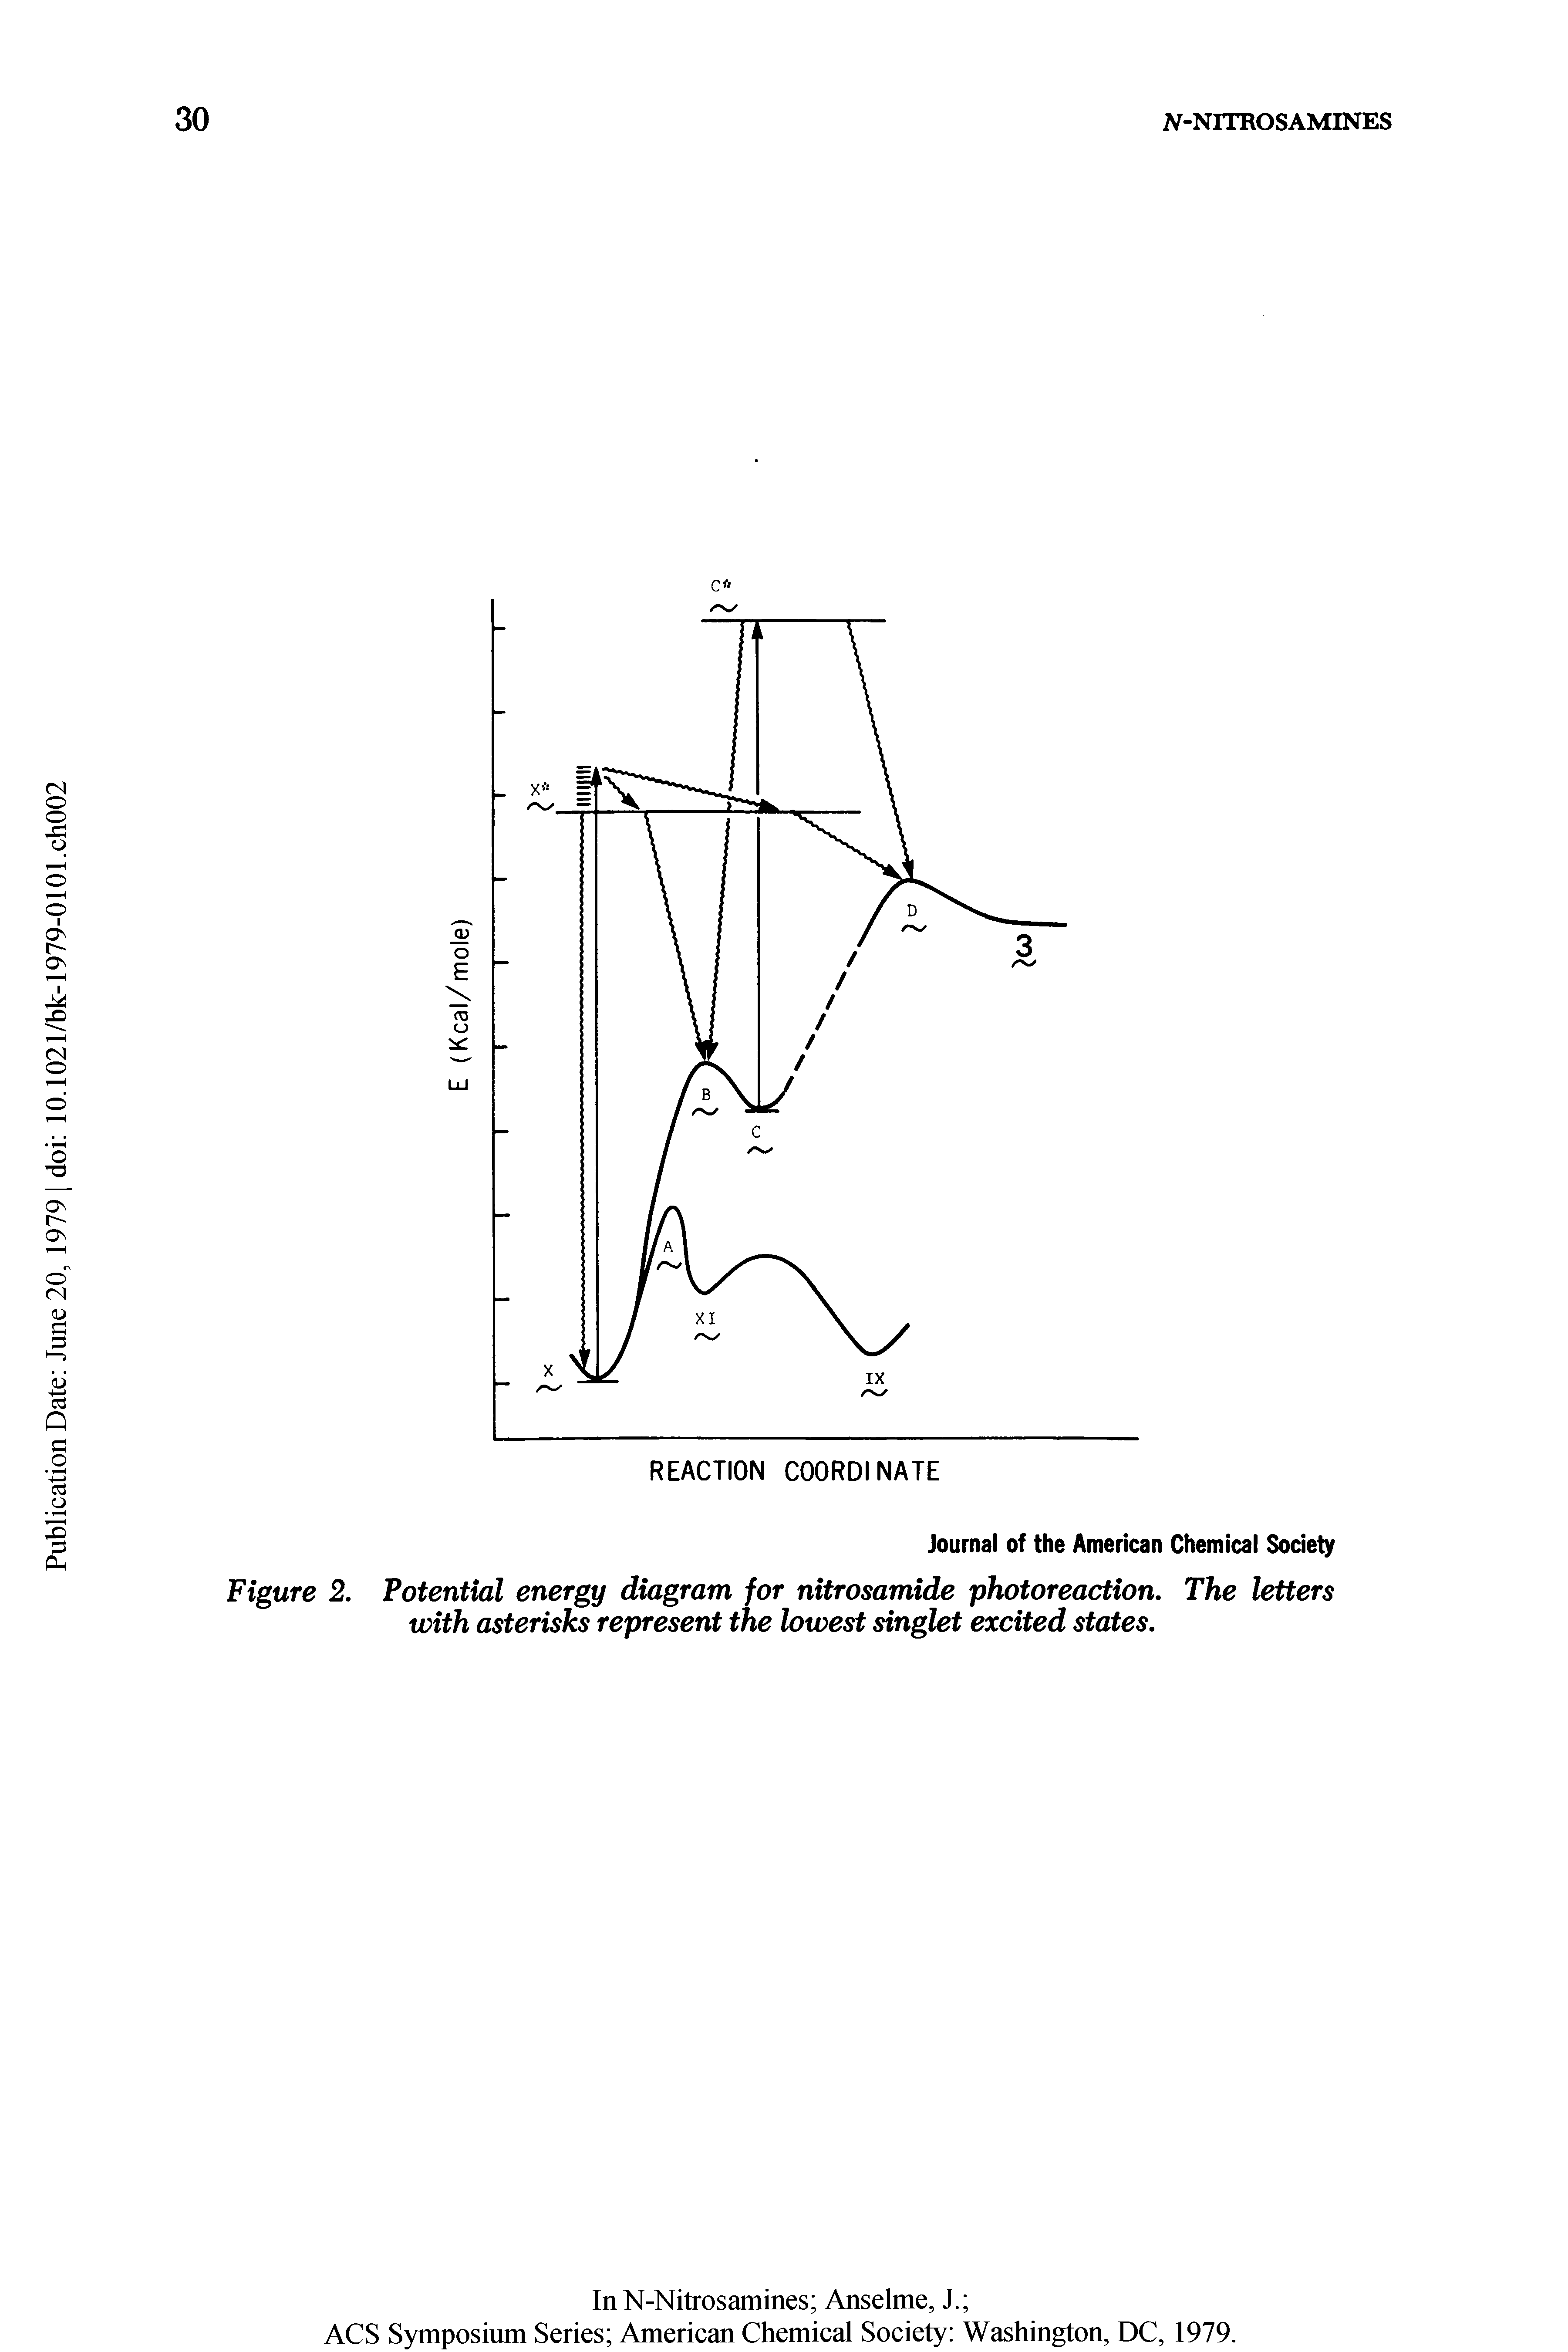 Figure 2. Potential energy diagram for nitrosamide photoreaction. The letters with asterisks represent the lowest singlet excited states.